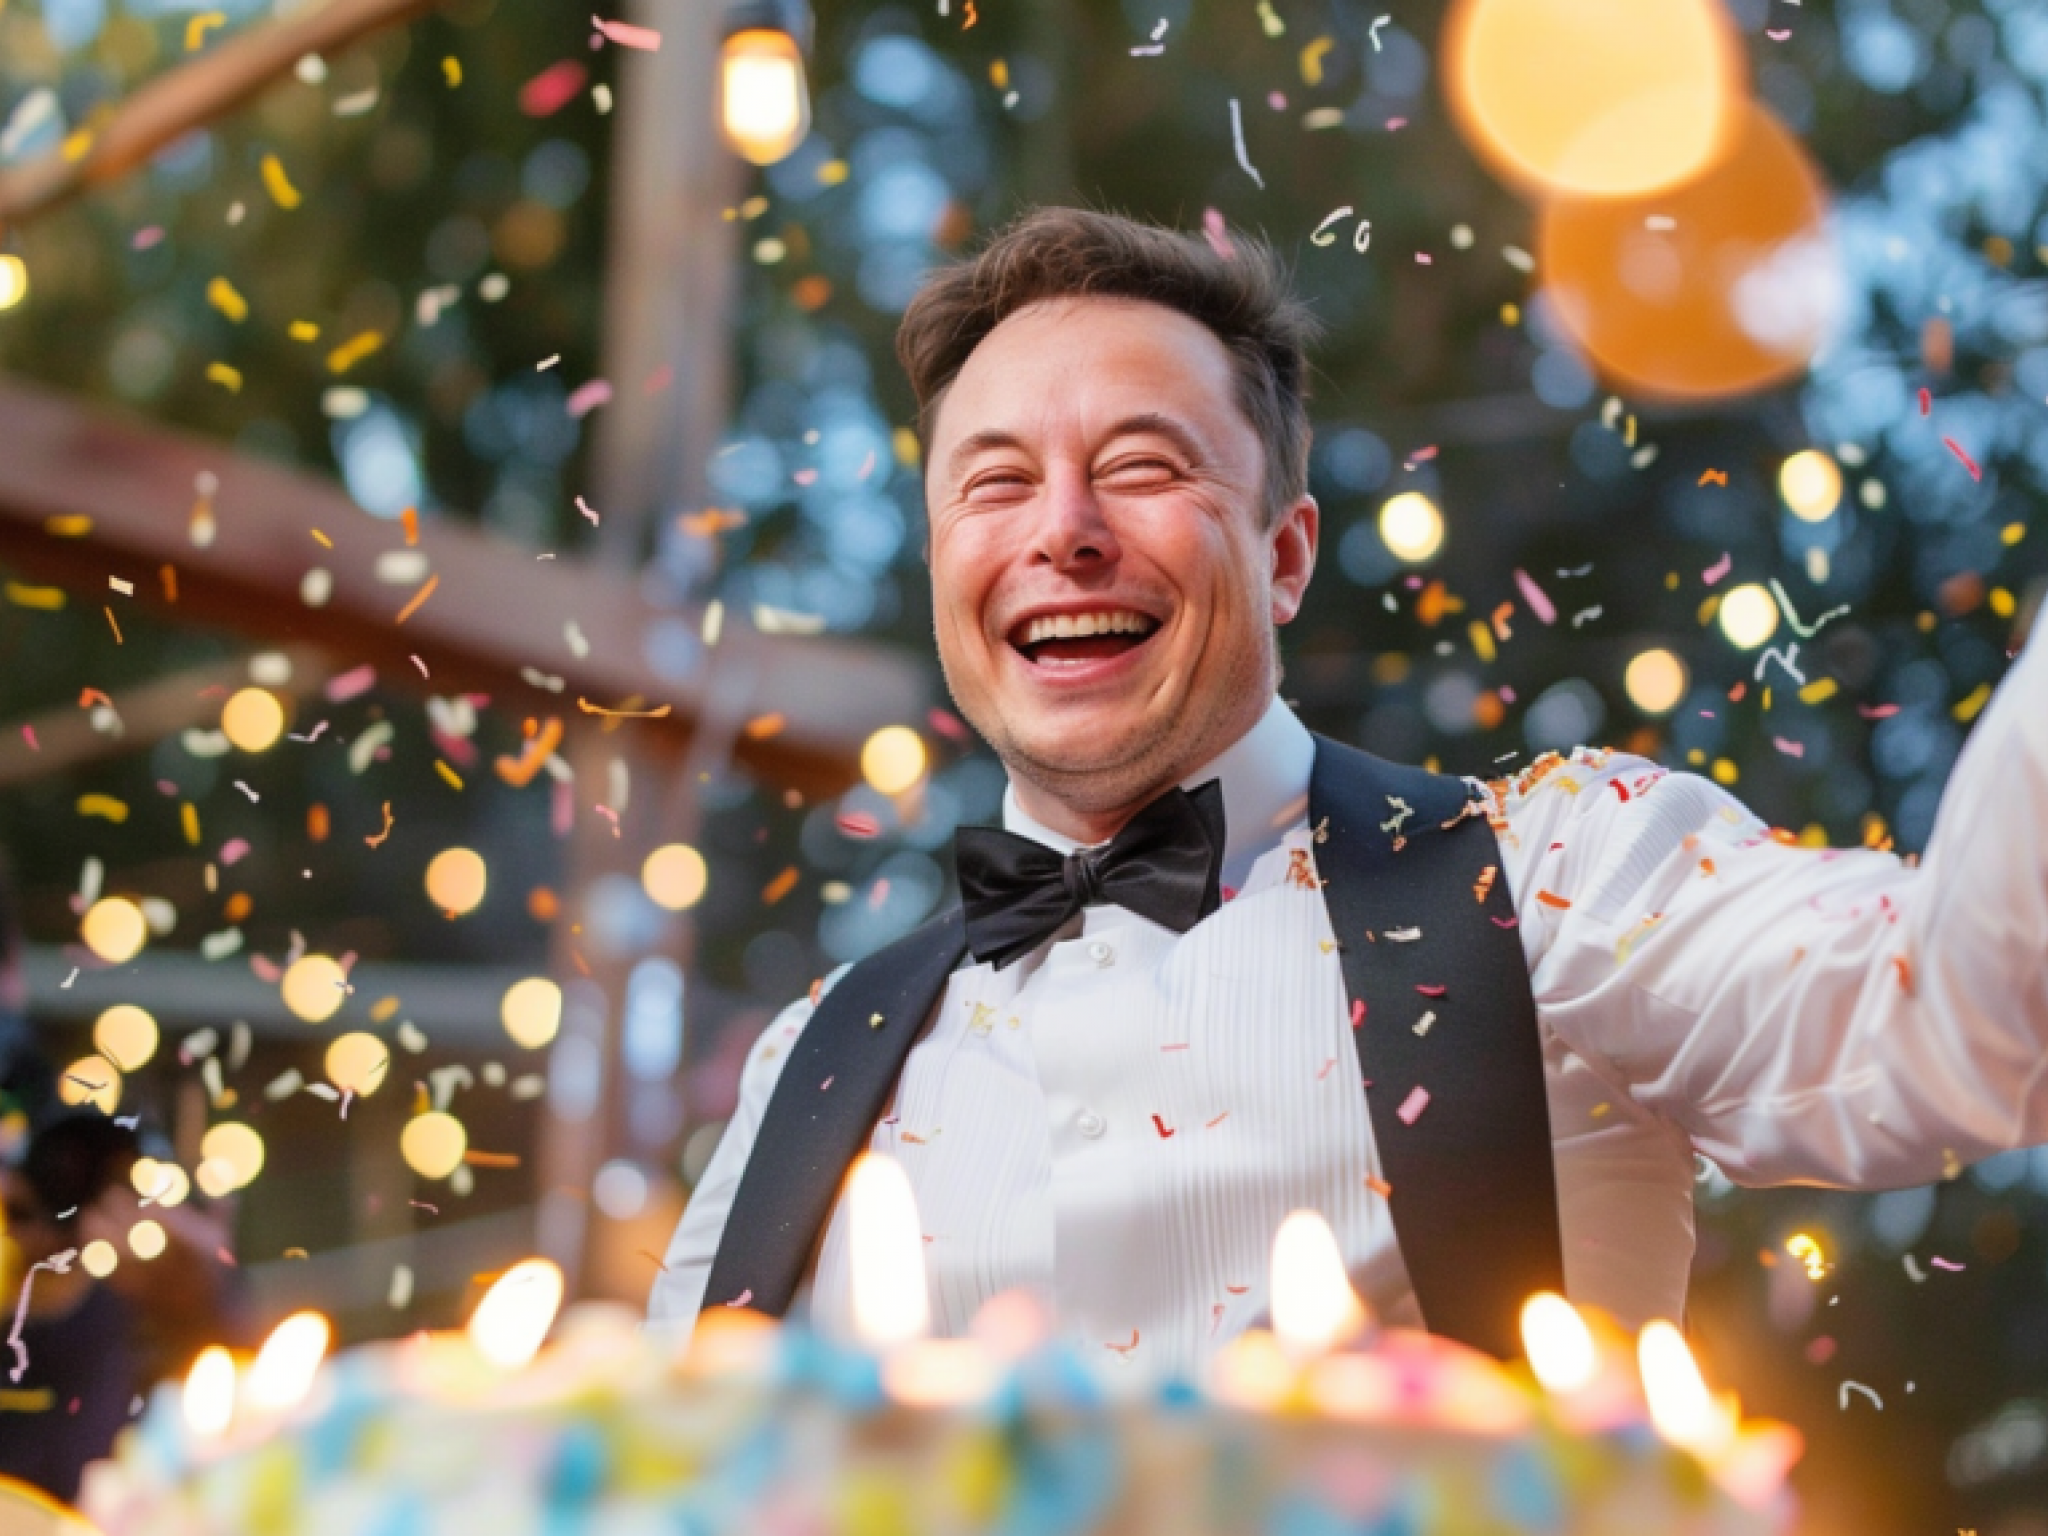  happy-birthday-elon-musk-53-facts-and-figures-about-tesla-spacex-ceo-on-his-53rd-birthday 